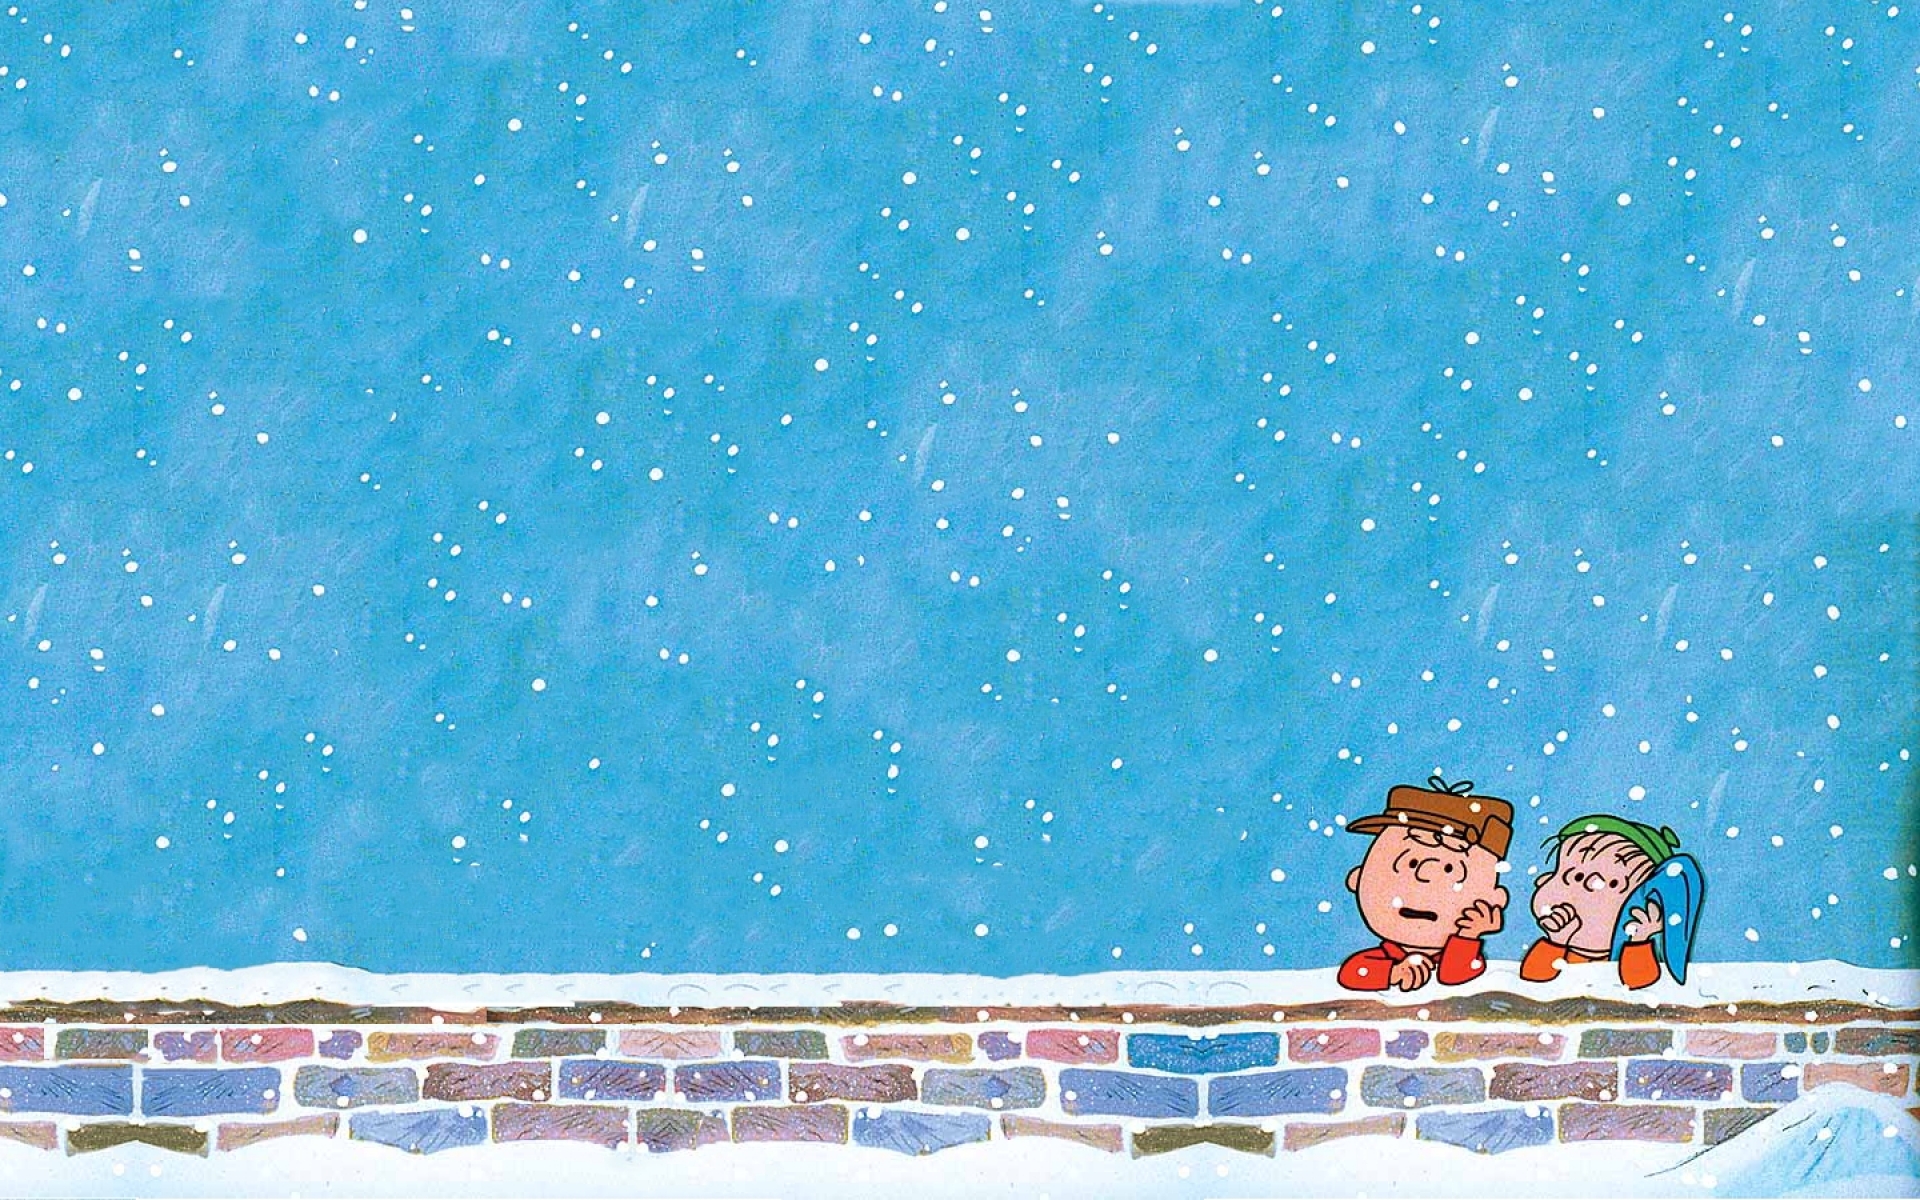 peanuts christmas facebook cover